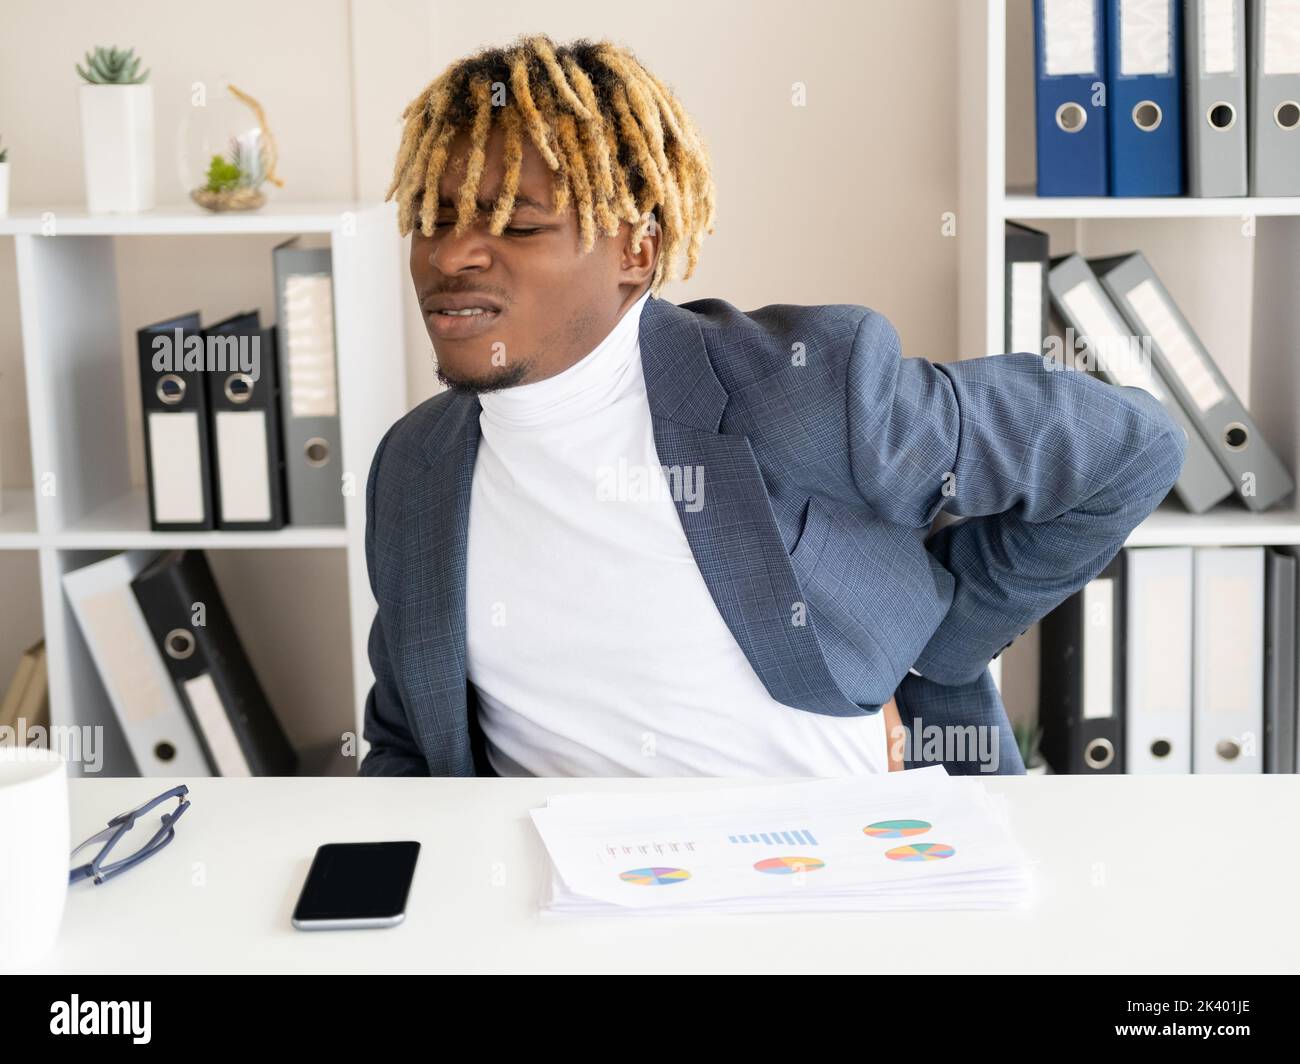 Sitting office work. Sick black man. Back pain. Exhausted guy holding hand on neck grimacing from ache sitting desk light room interior. Stock Photo